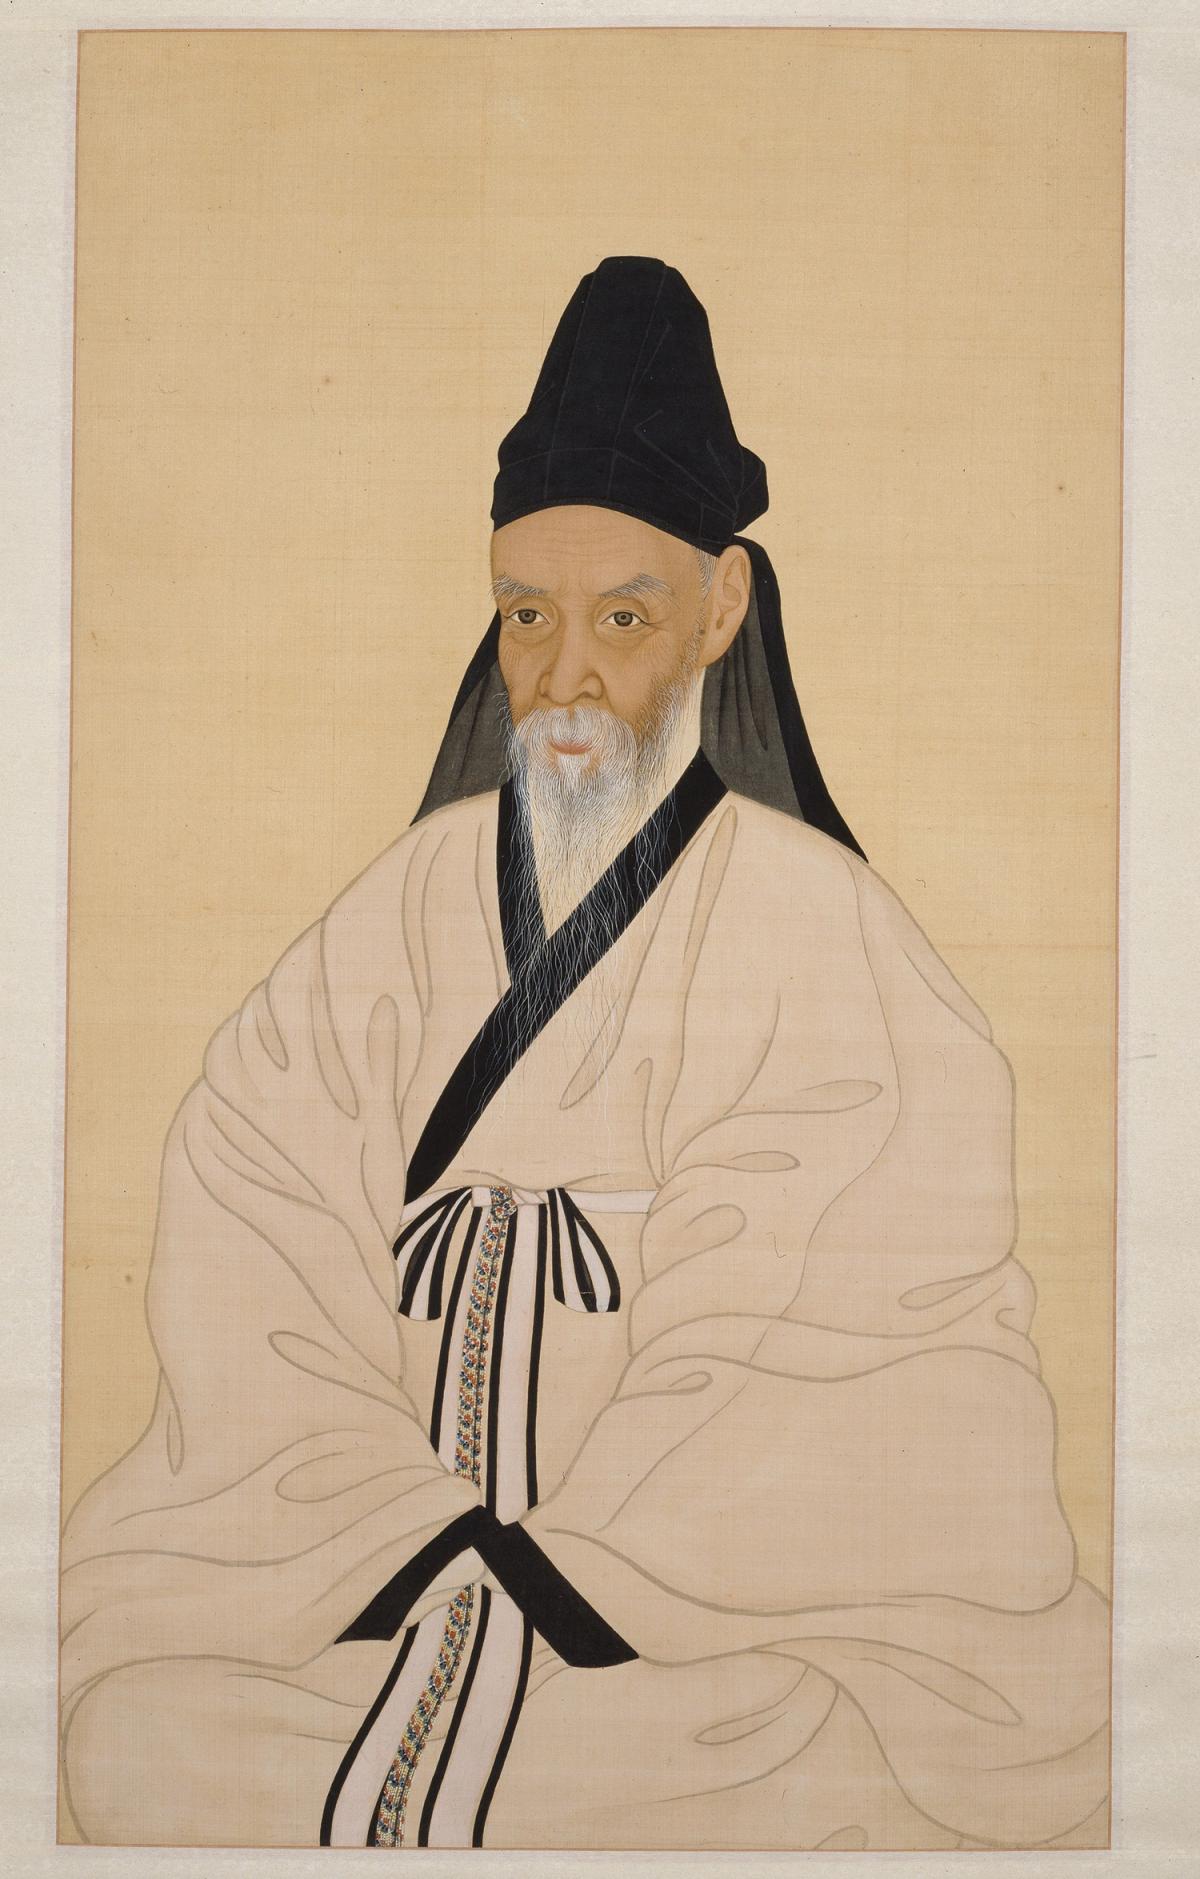 Yi Jae in a white robe, seated with hands folded in his lap, wearing a black cap